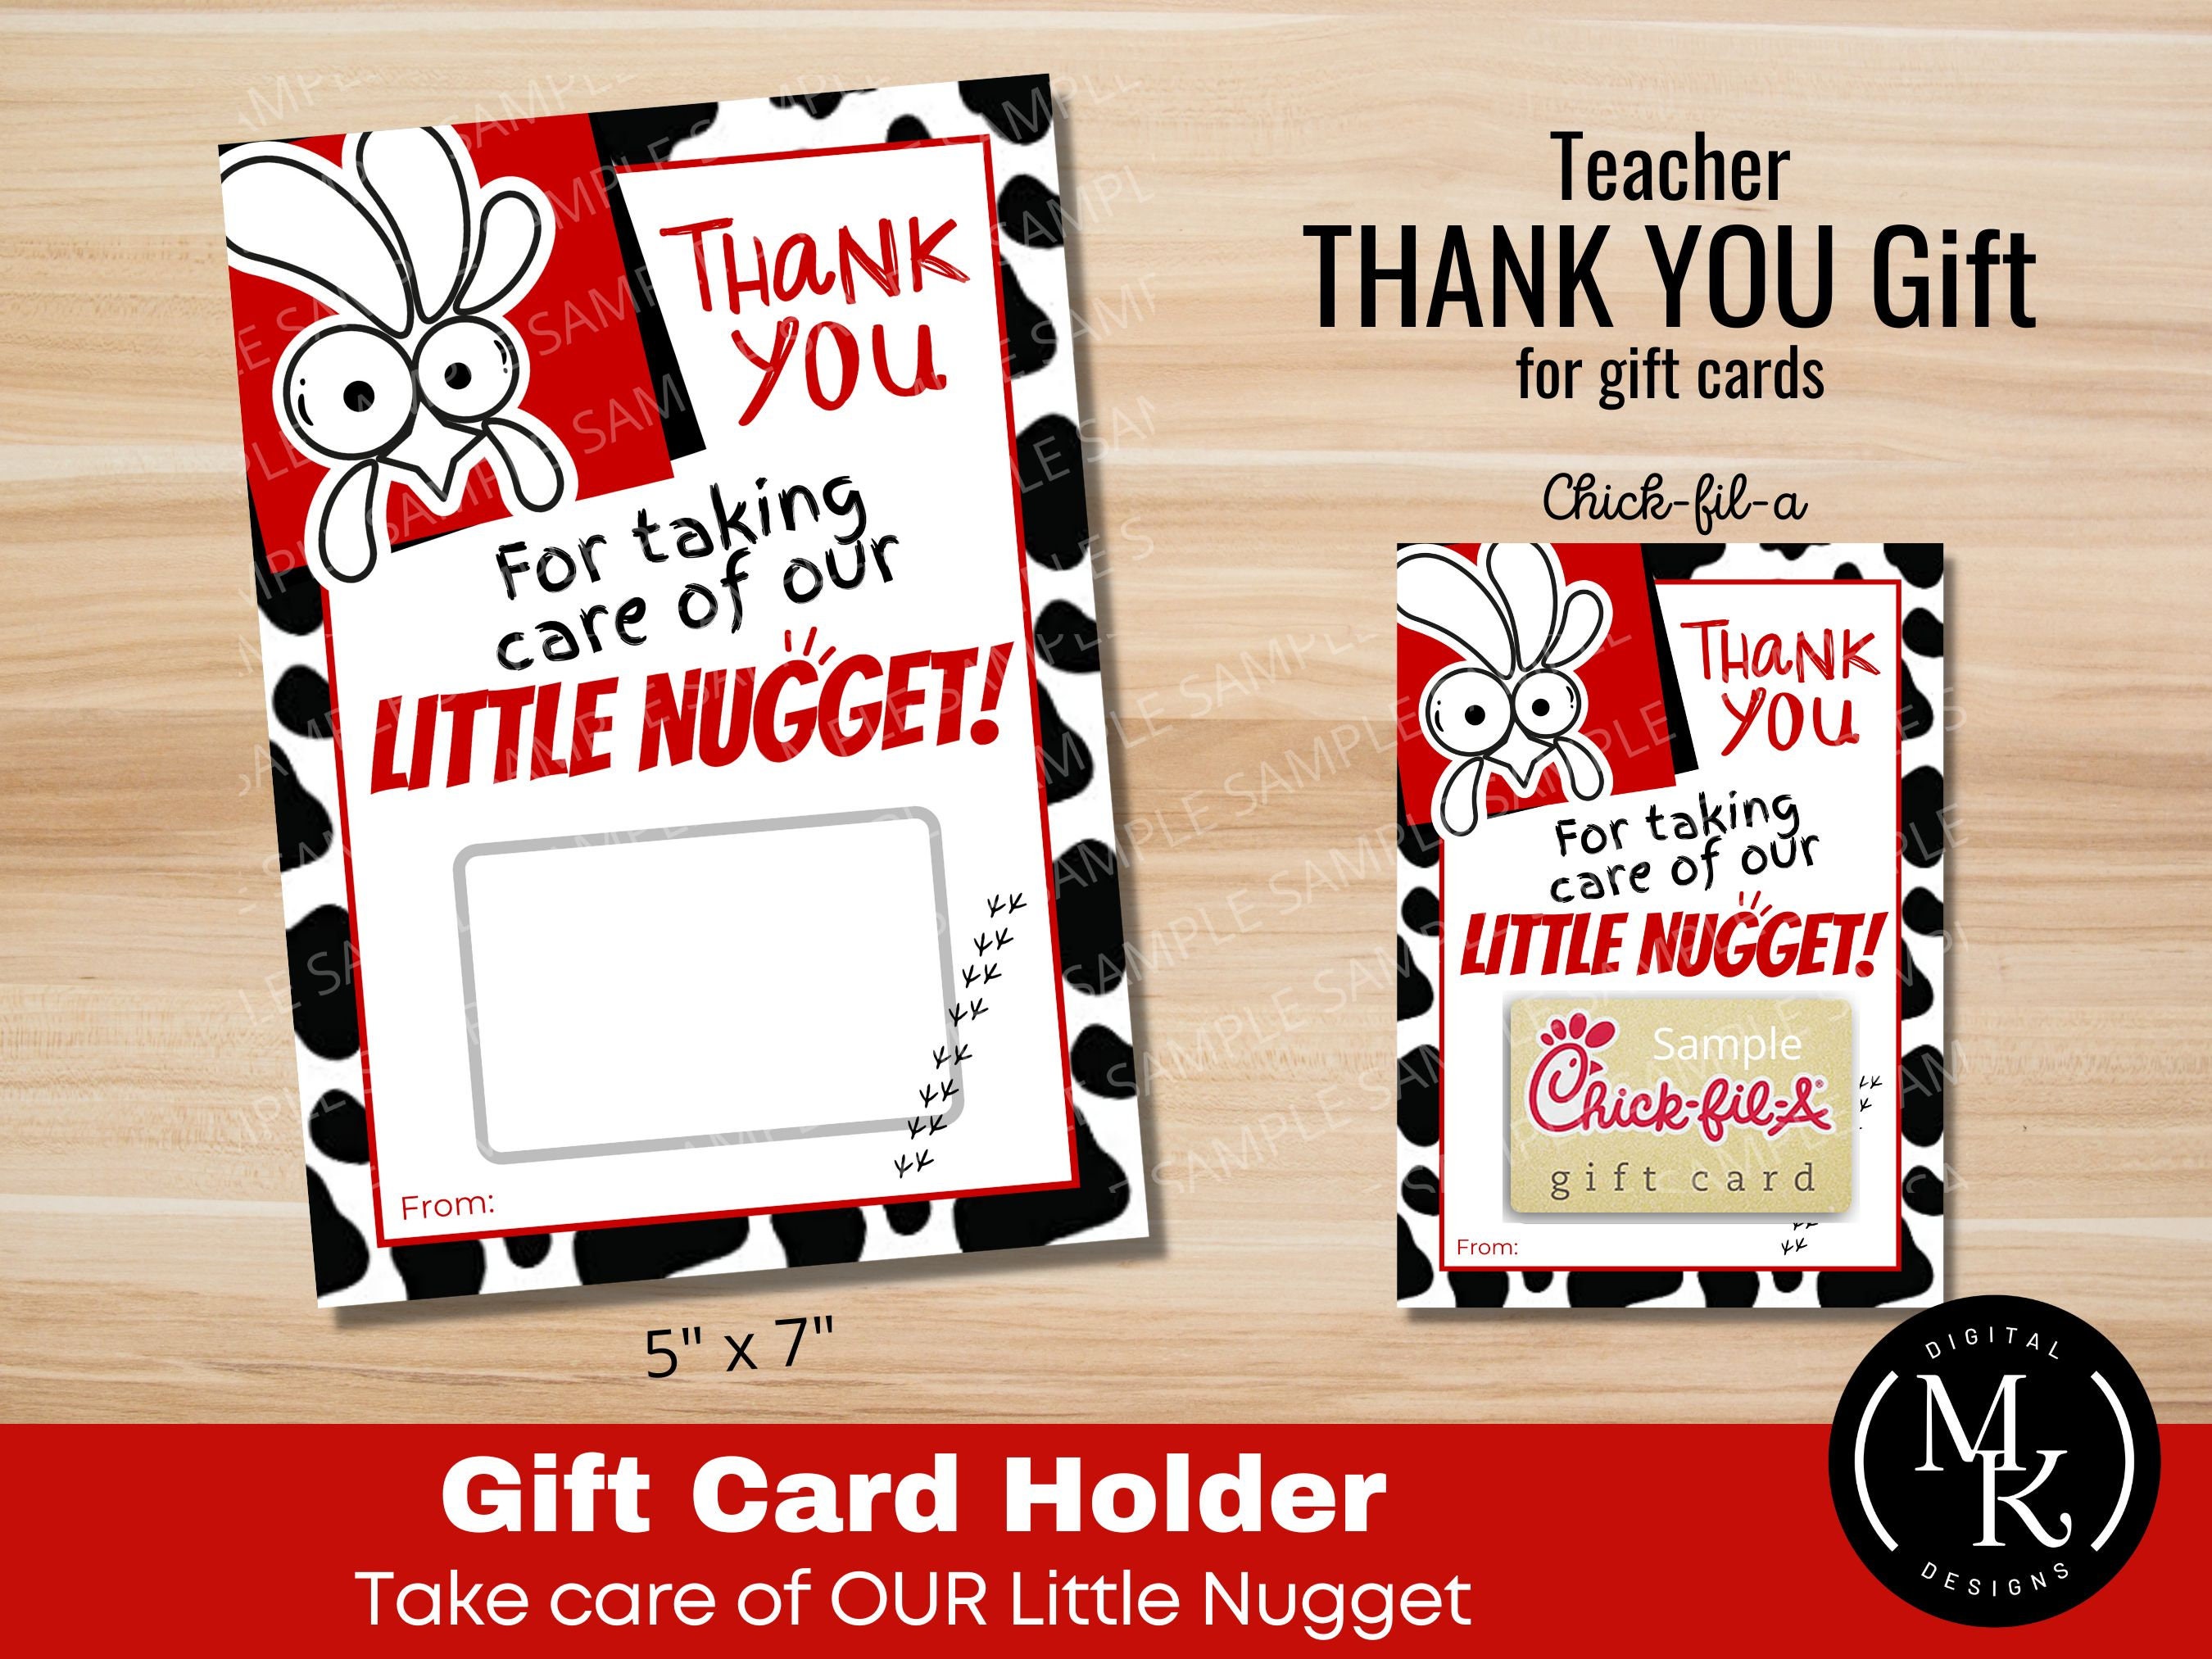 Teacher Thank You Card for Chick-fil-a Gift Card, Printable Gift